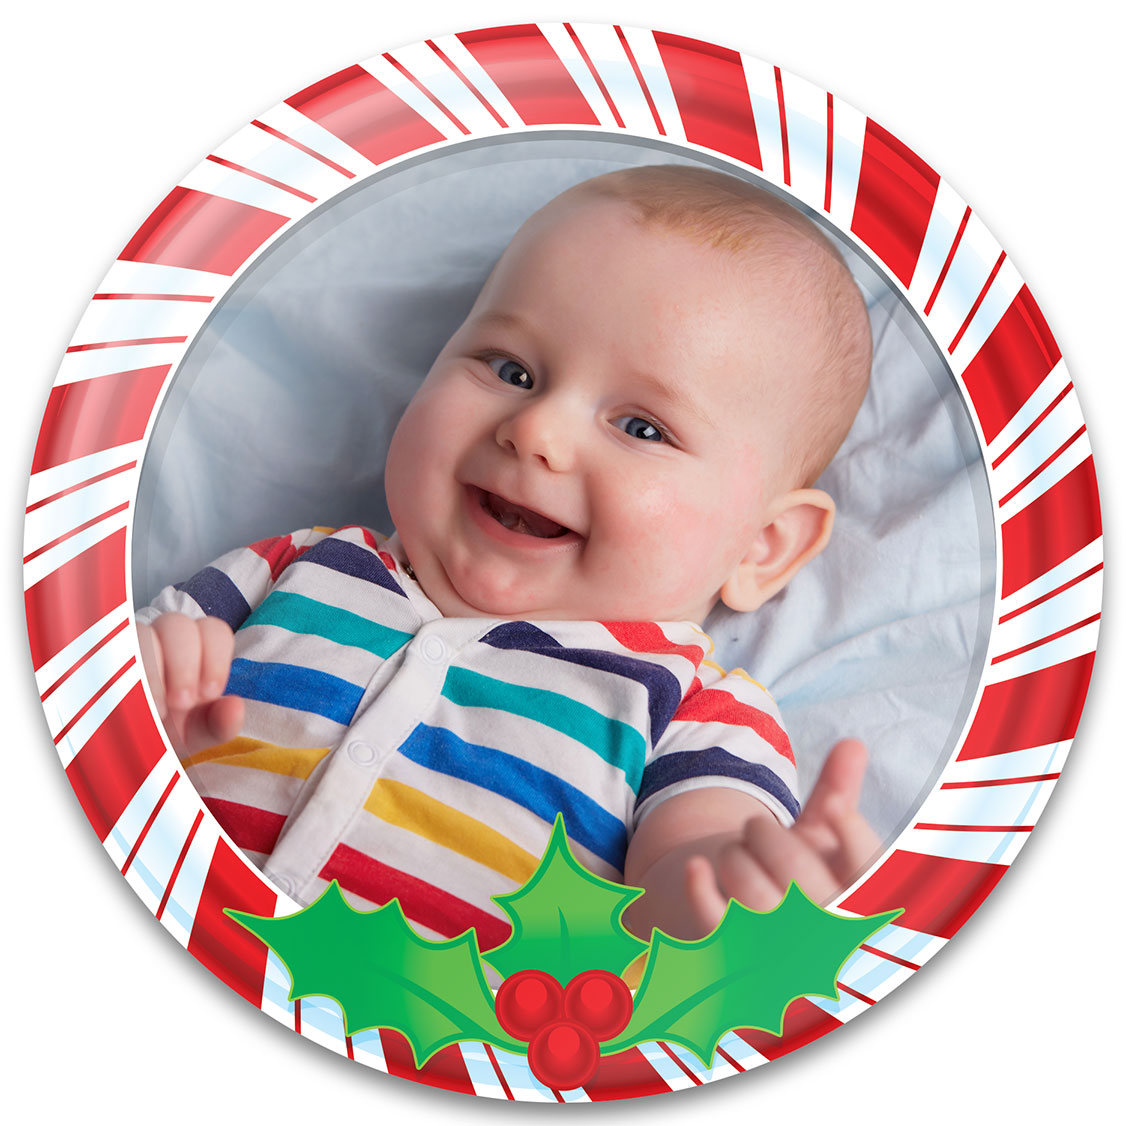 Candy Cane - Baby's 1st Christmas Ornament Design